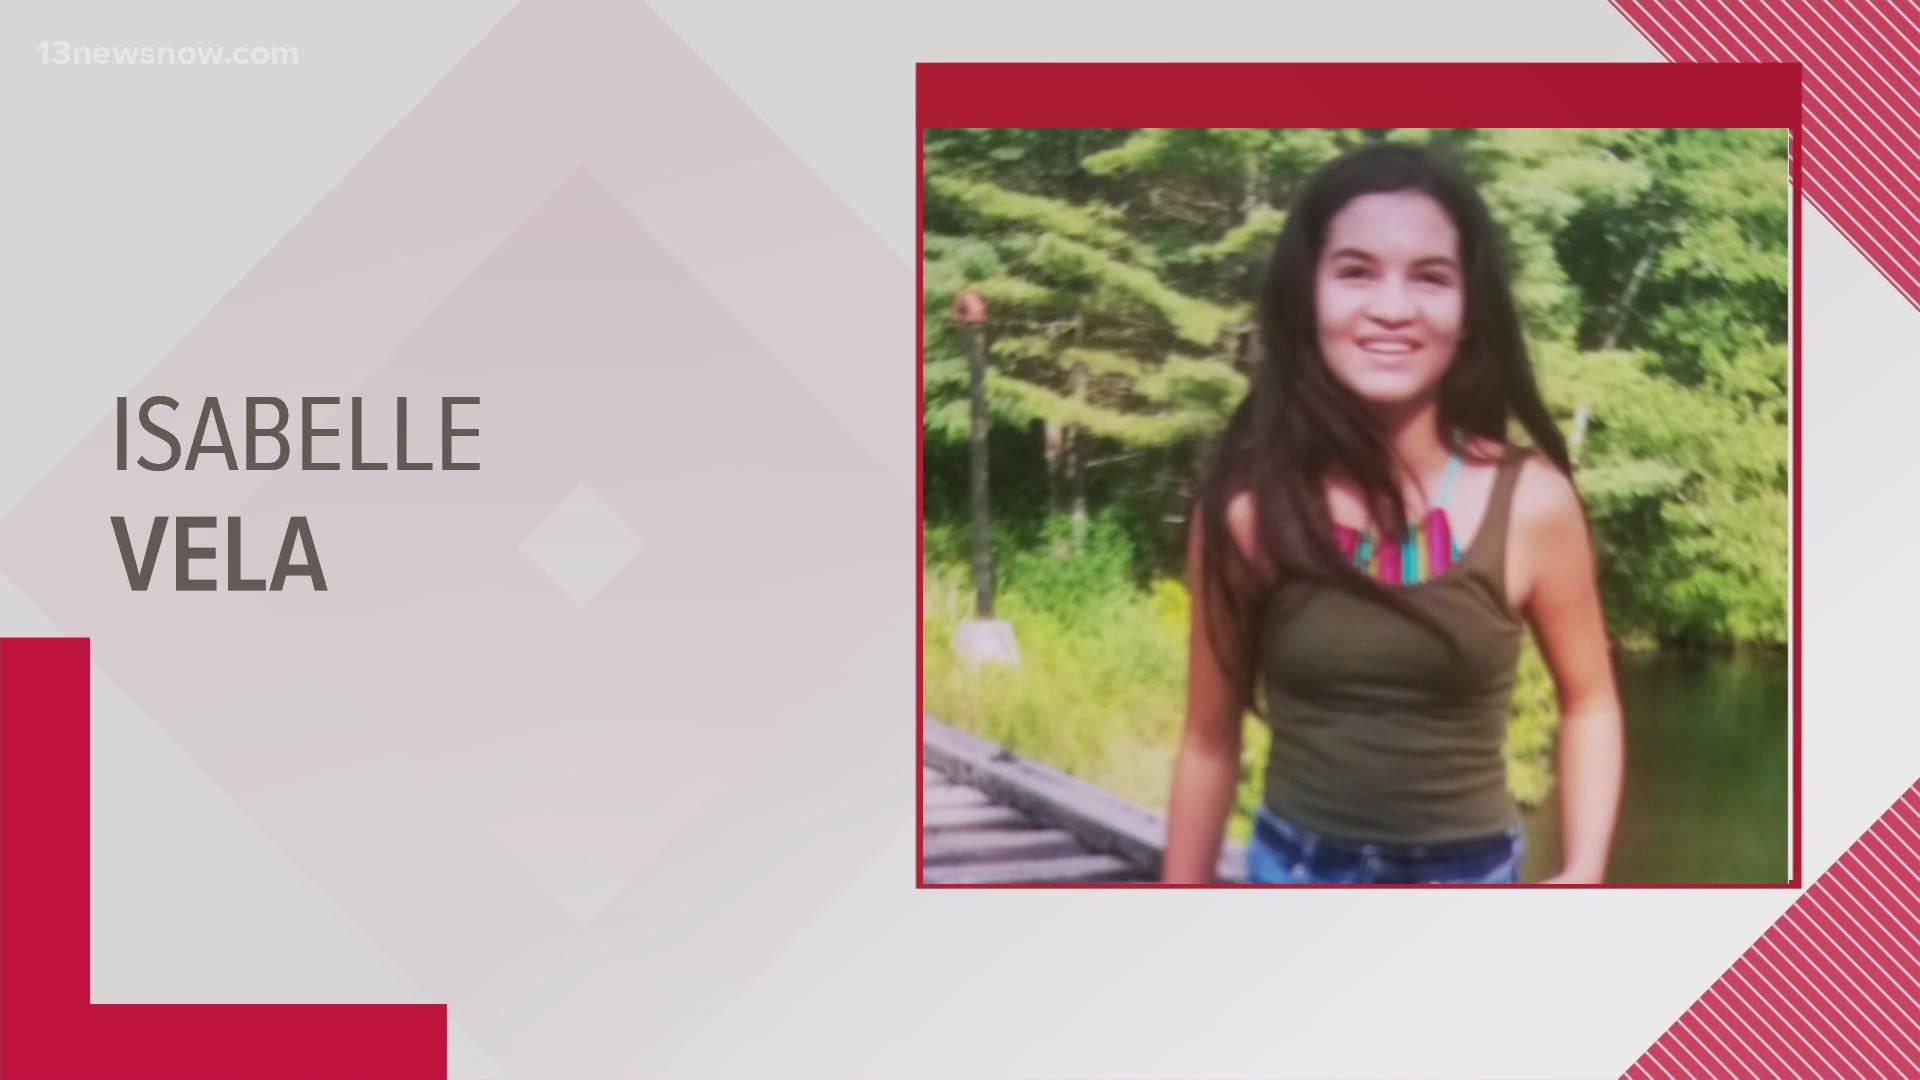 Isabelle Vela was last seen just after 5 p.m. on Jan. 5 in the 5600 block of E. Princess Anne Road.